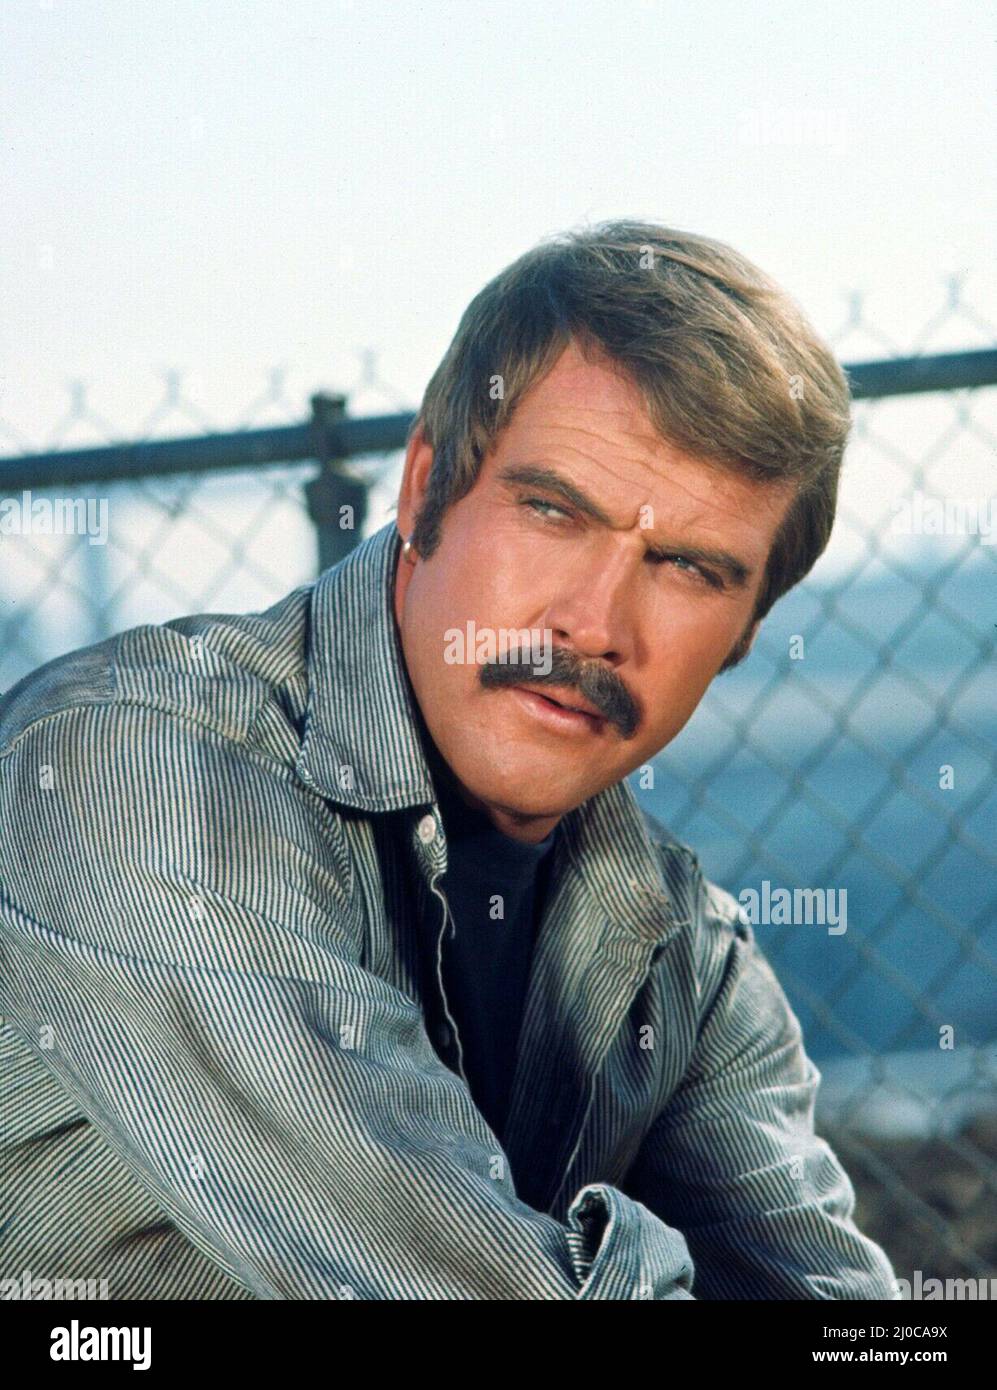 LEE MAJORS in THE SIX MILLION DOLLAR MAN (1974), directed by RICHARD DONNER, RICHARD IRVING, JERRY LONDON and ERNEST PINTOFF. Credit: Universal Pictures Television / Album Stock Photo